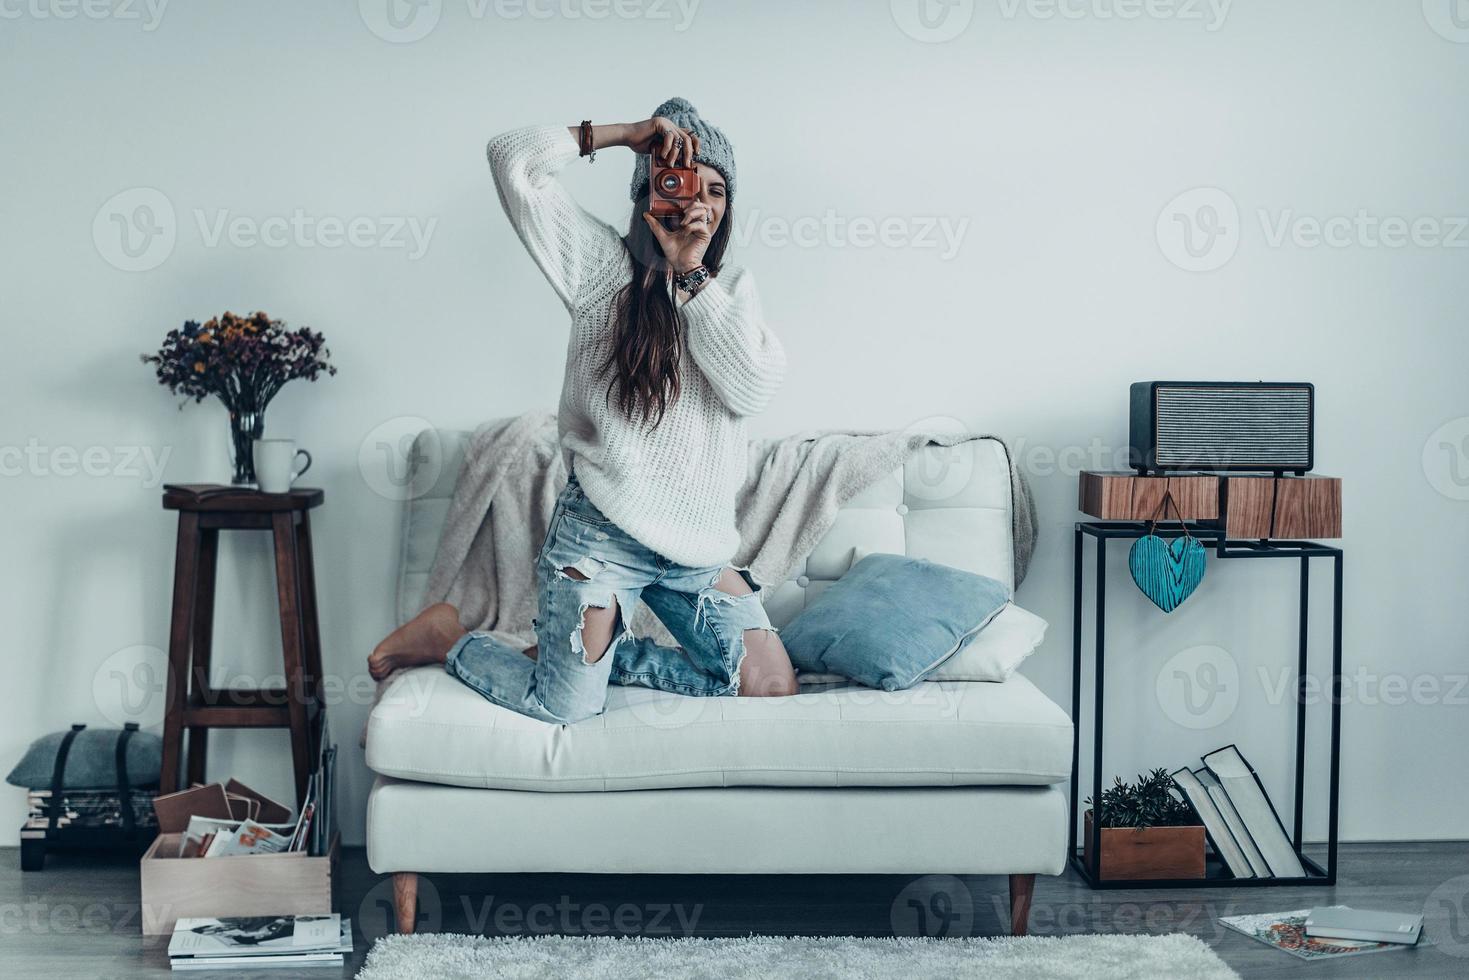 Smile  Beautiful young woman in casual wear and knit hat taking a photo by her retro camera while standing on the sofa at home